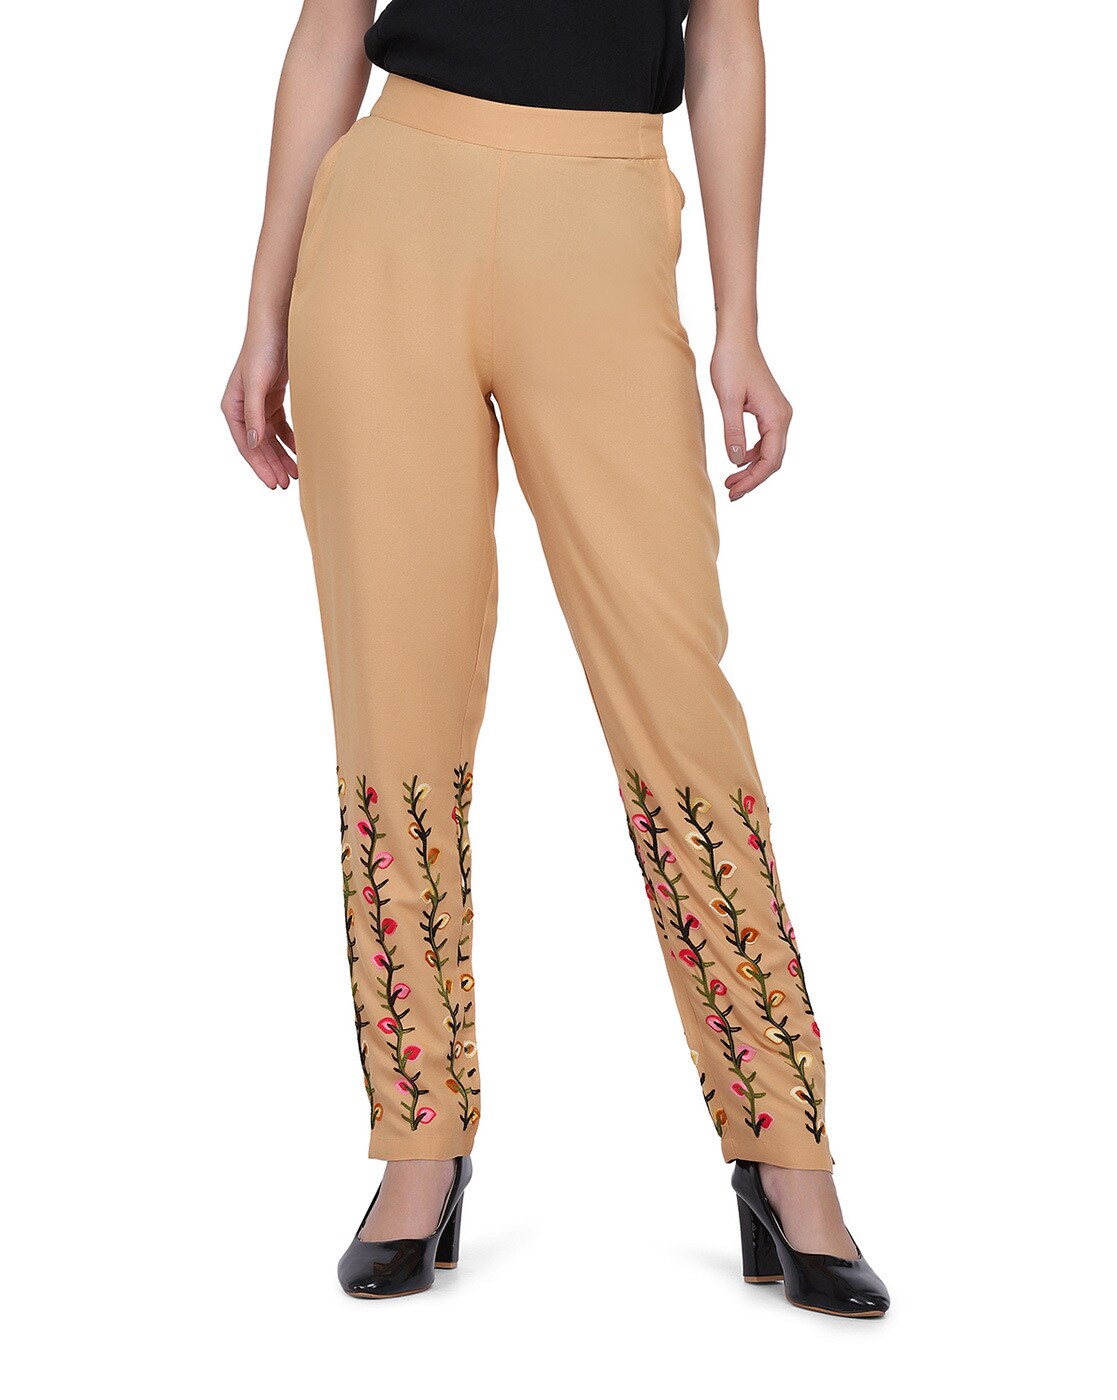 Source New Arrivals Latest Fashion Ladies Pants  Trousers Indian Recycled  Sari Fabric Pants Trouser for Women on malibabacom